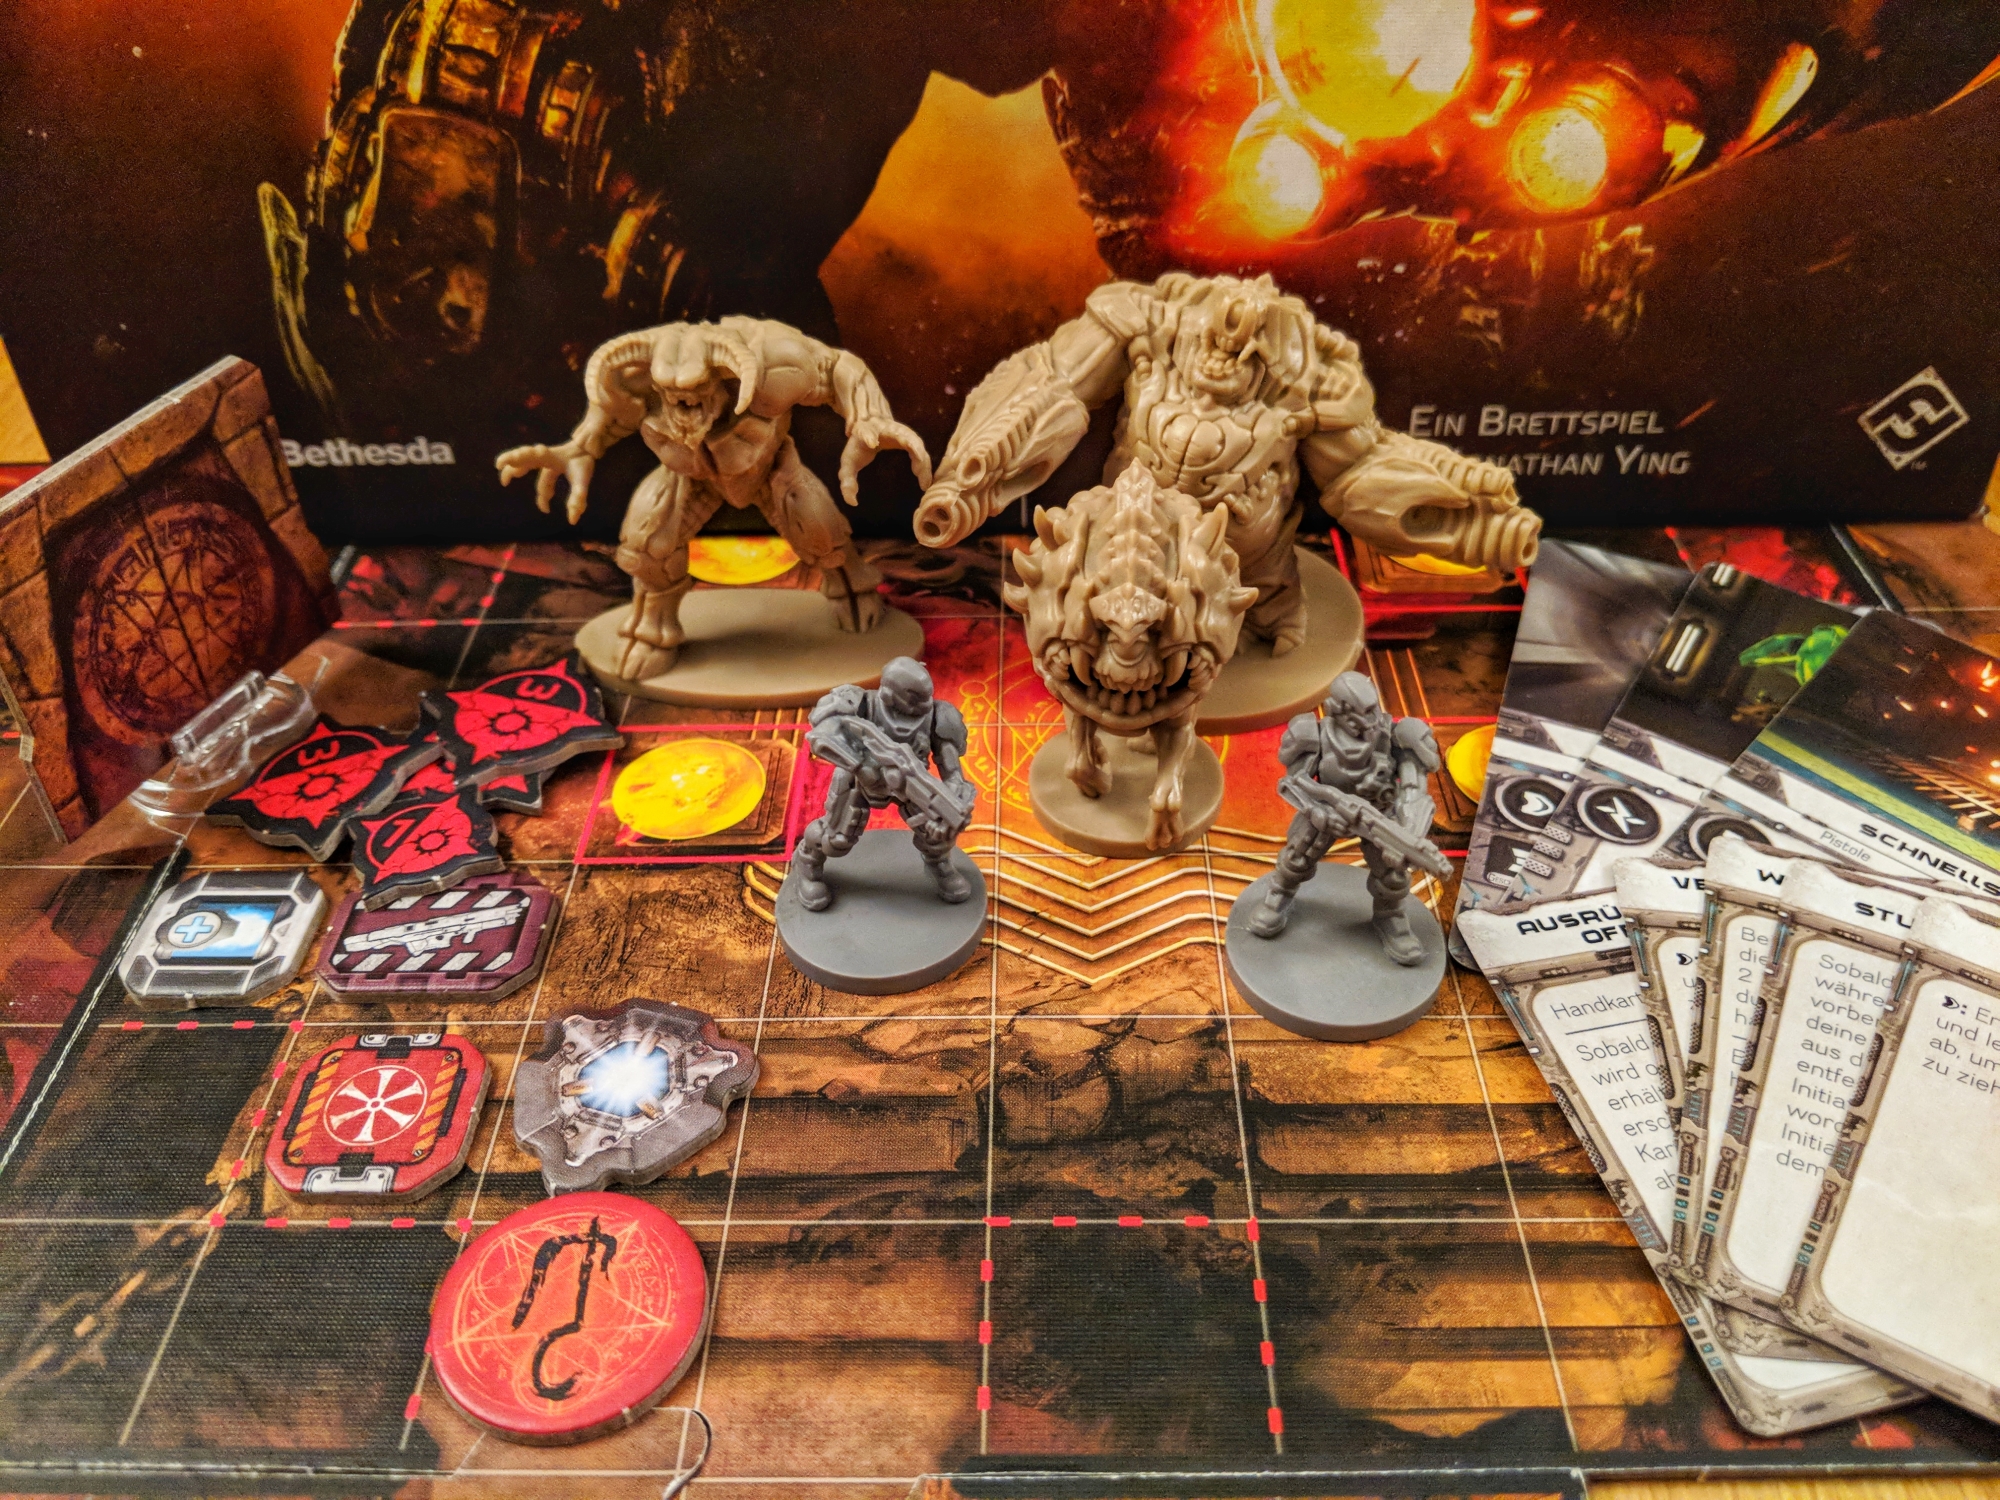 c't zockt Spiele-Review: "DOOM: The Board Game" | heise online